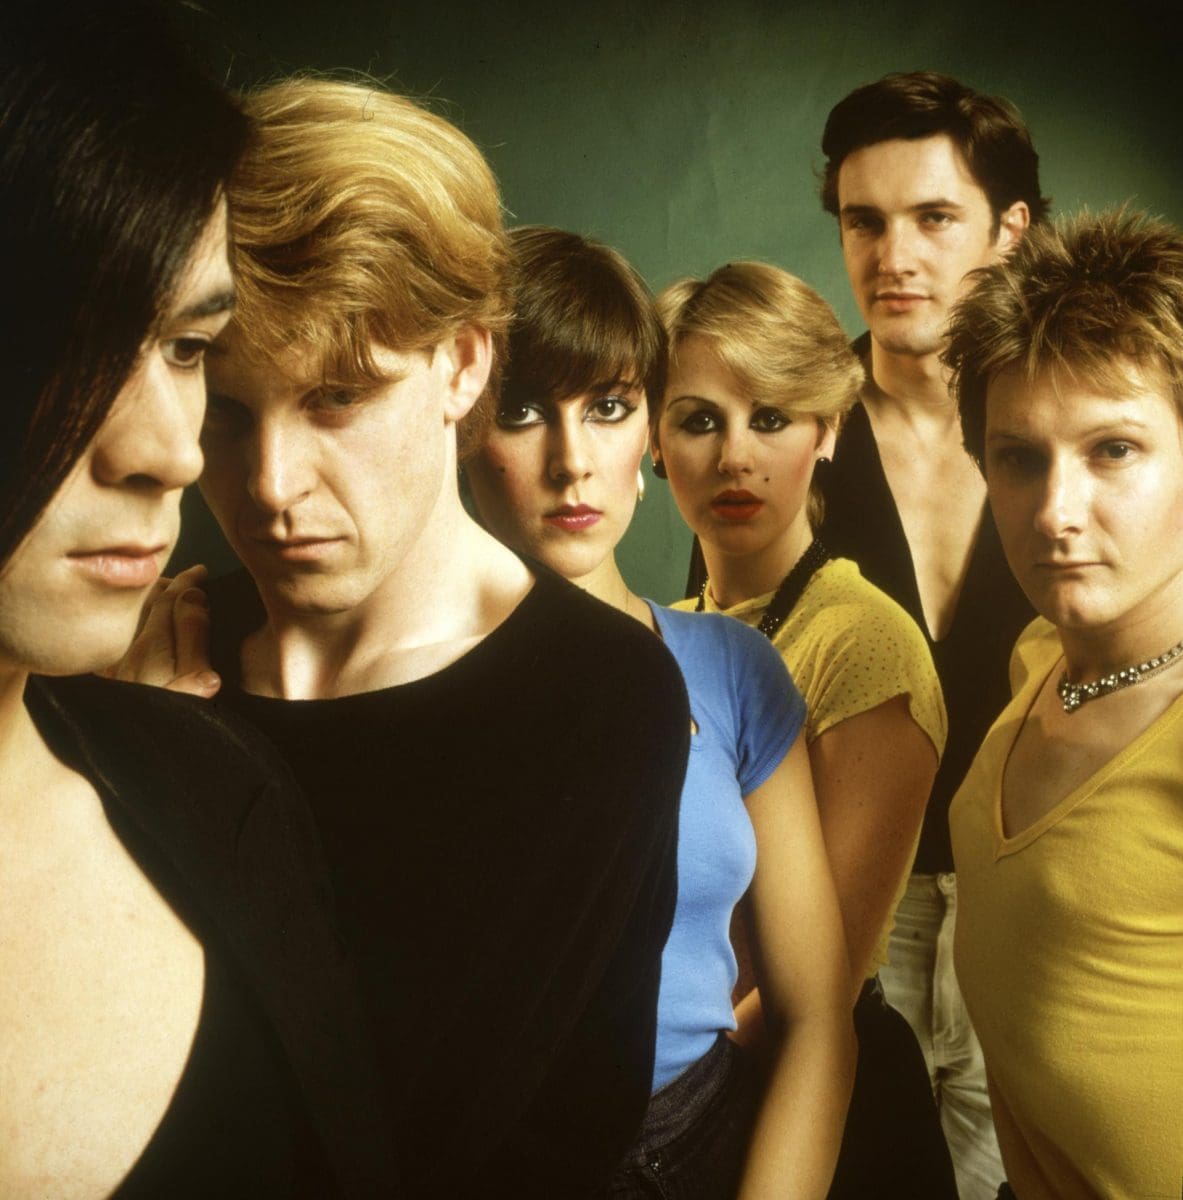 New The Human League boxset to be released: 'The Virgin Years'